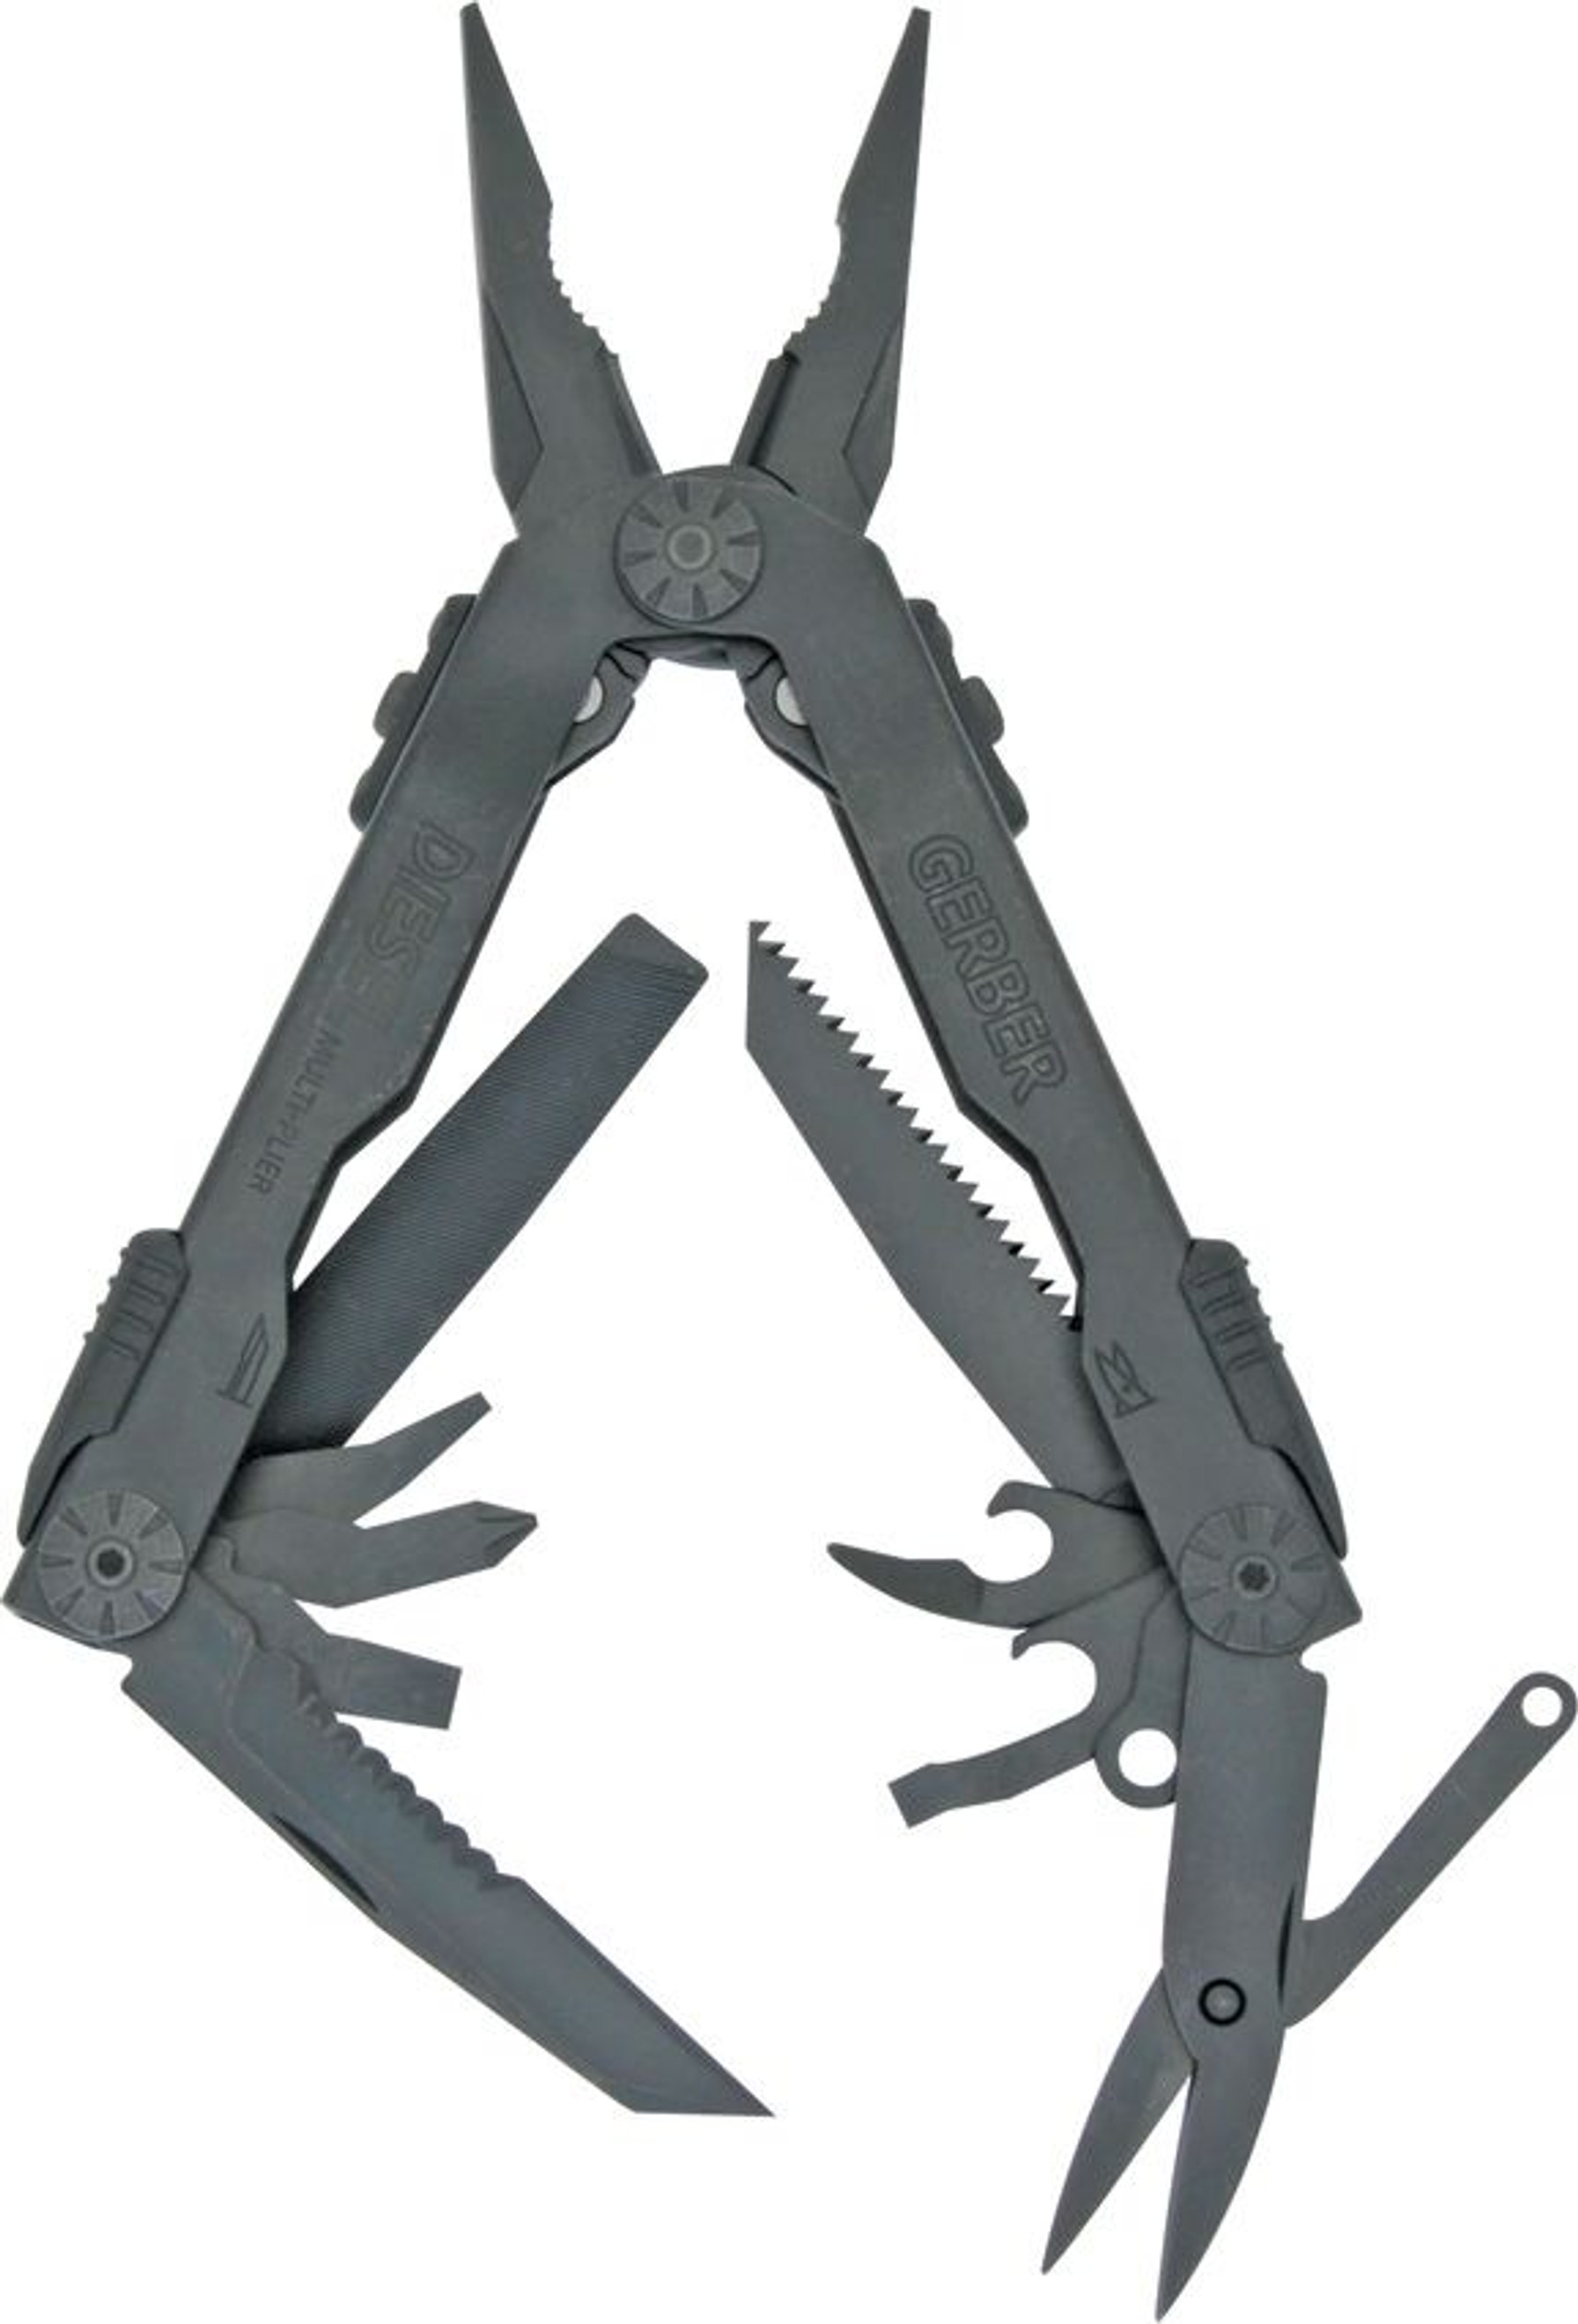 Gerber Diesel Multi-Plier with Black Oxide Finish and Nylon Sheath